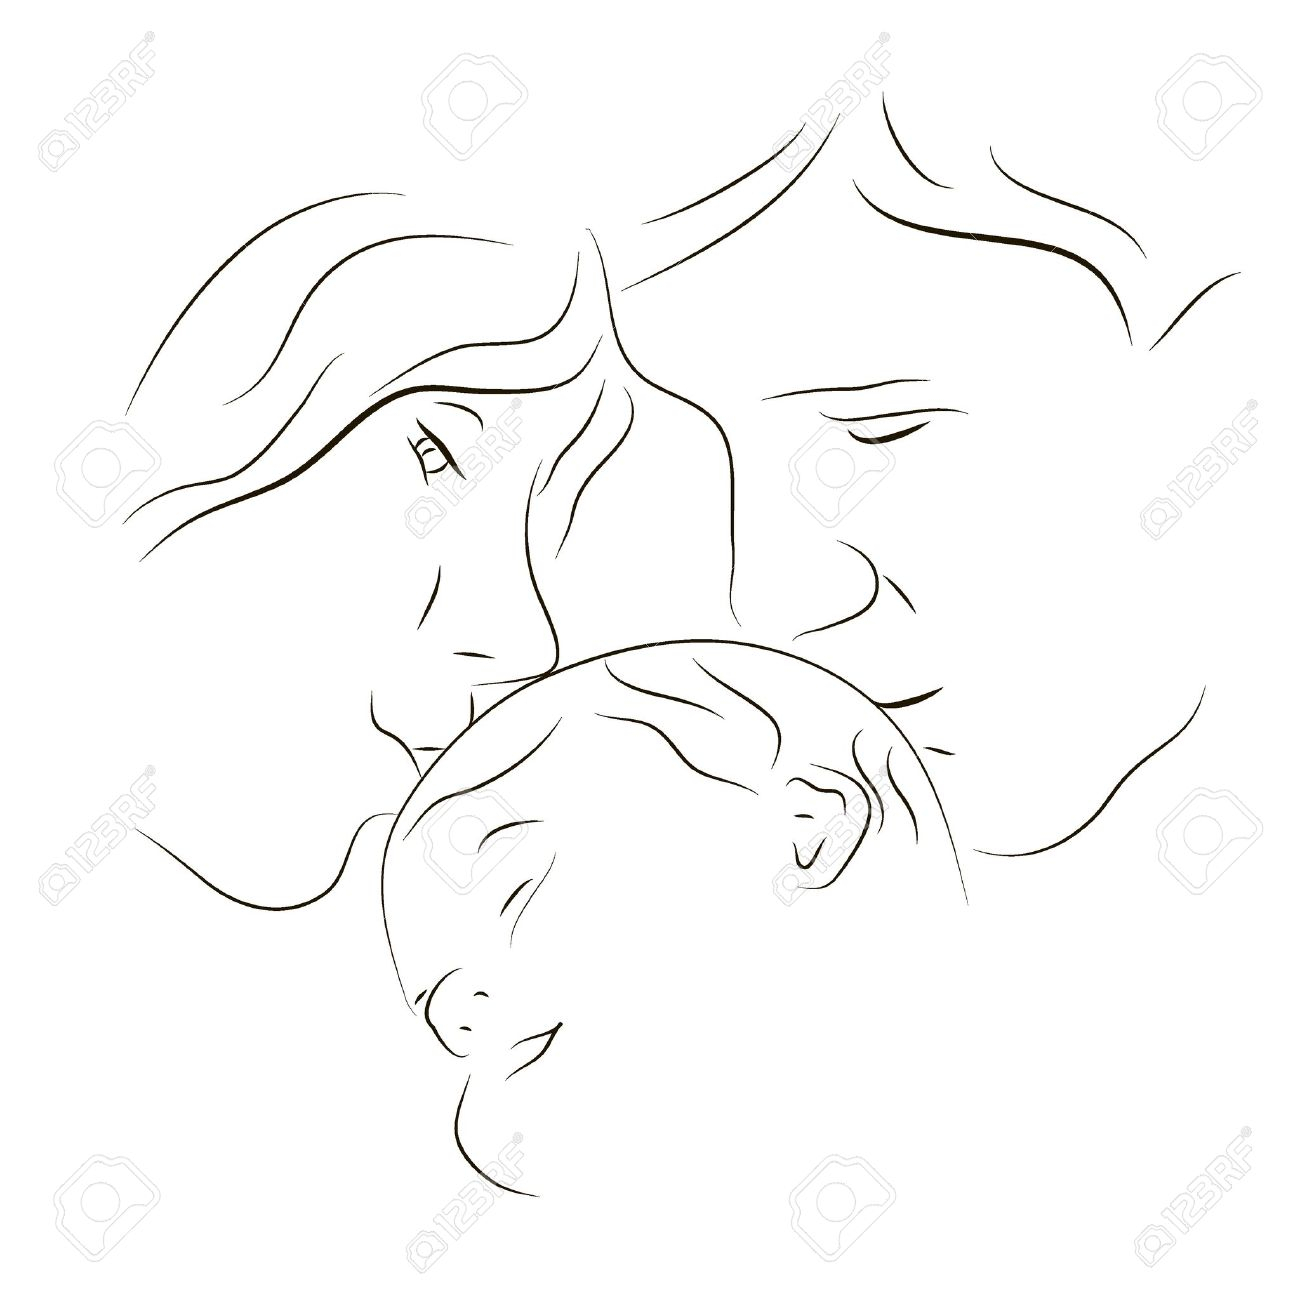 35+ Latest Pencil Sketch Mother And Baby Drawing Images Download